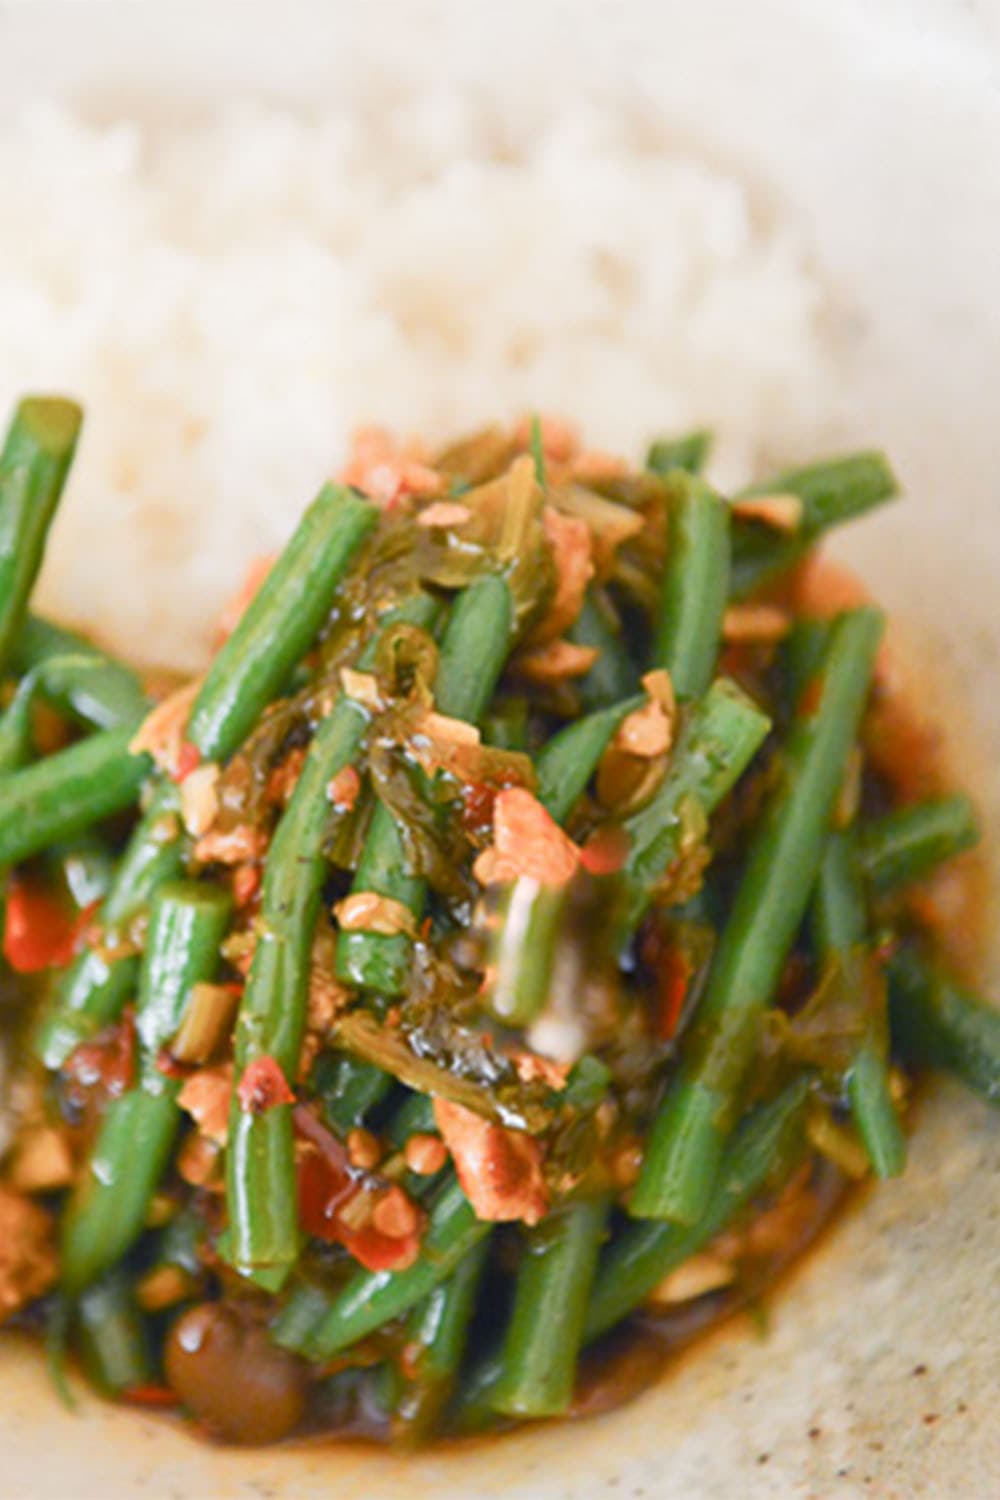 Sichuan Style Greens With Minced Pork